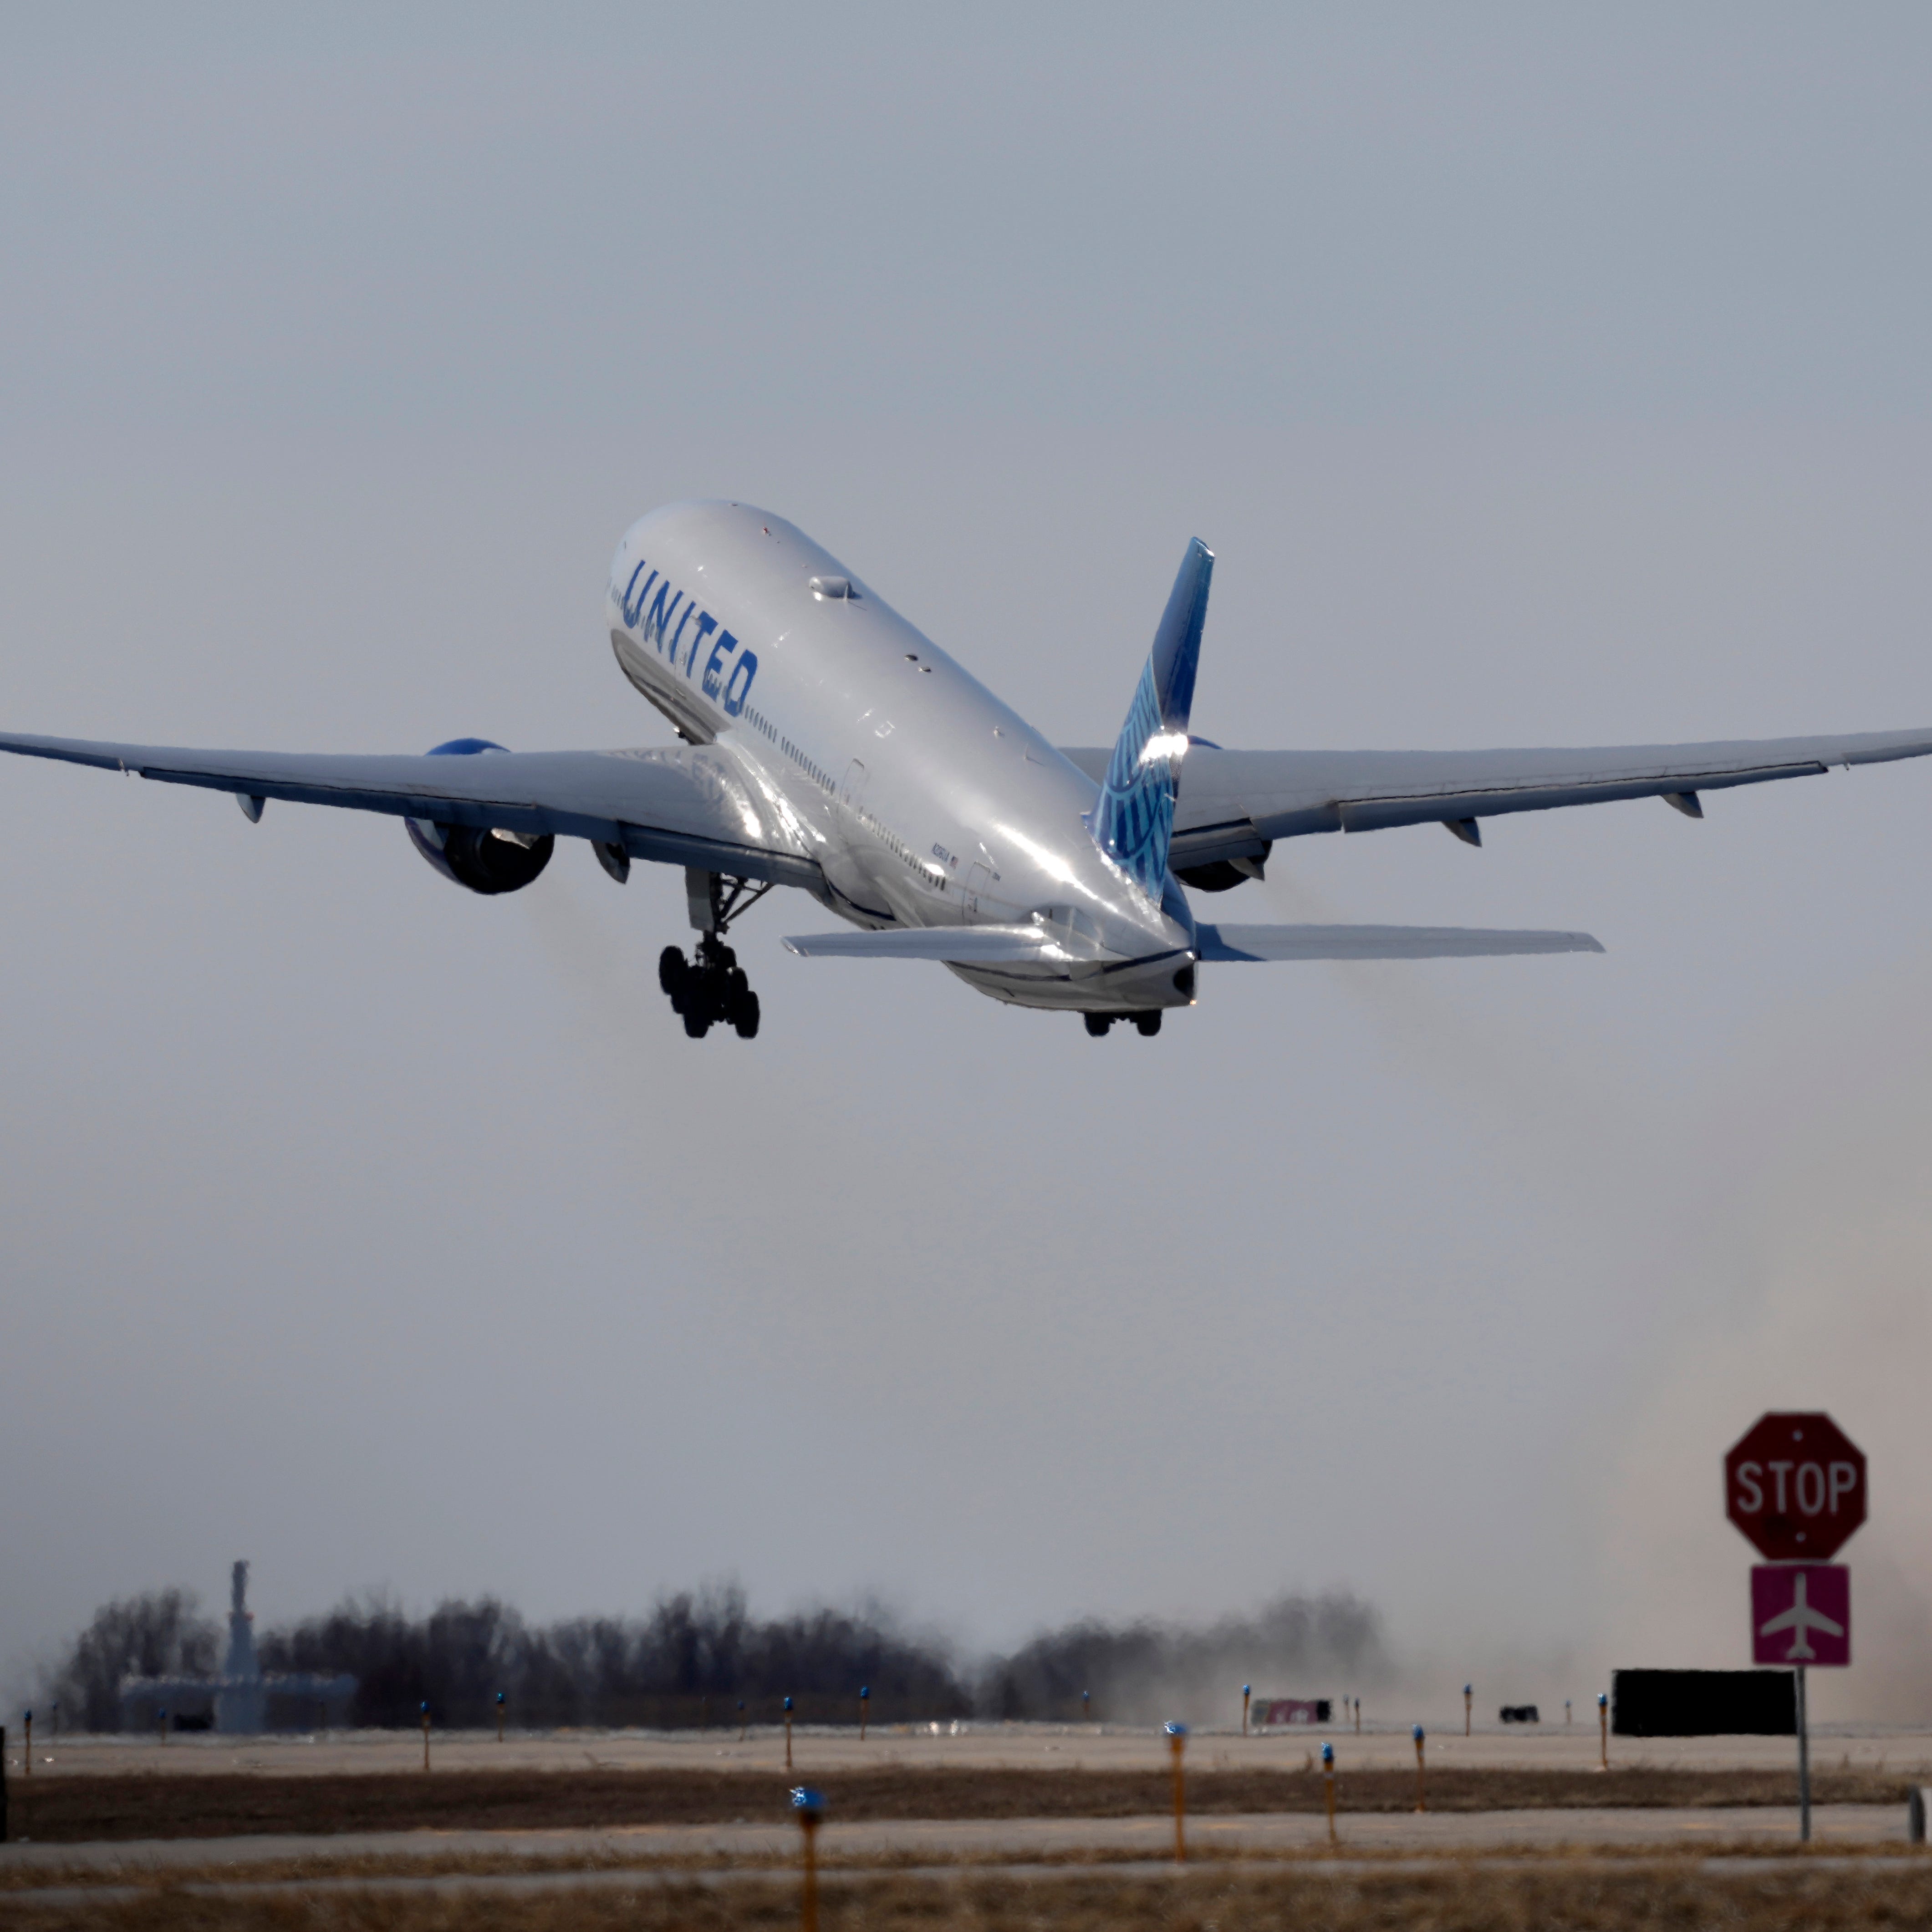 A United Airlines jet takes off Sunday, Feb. 5, 2023, in Kansas City, Missouri. (AP Photo/Charlie Riedel)